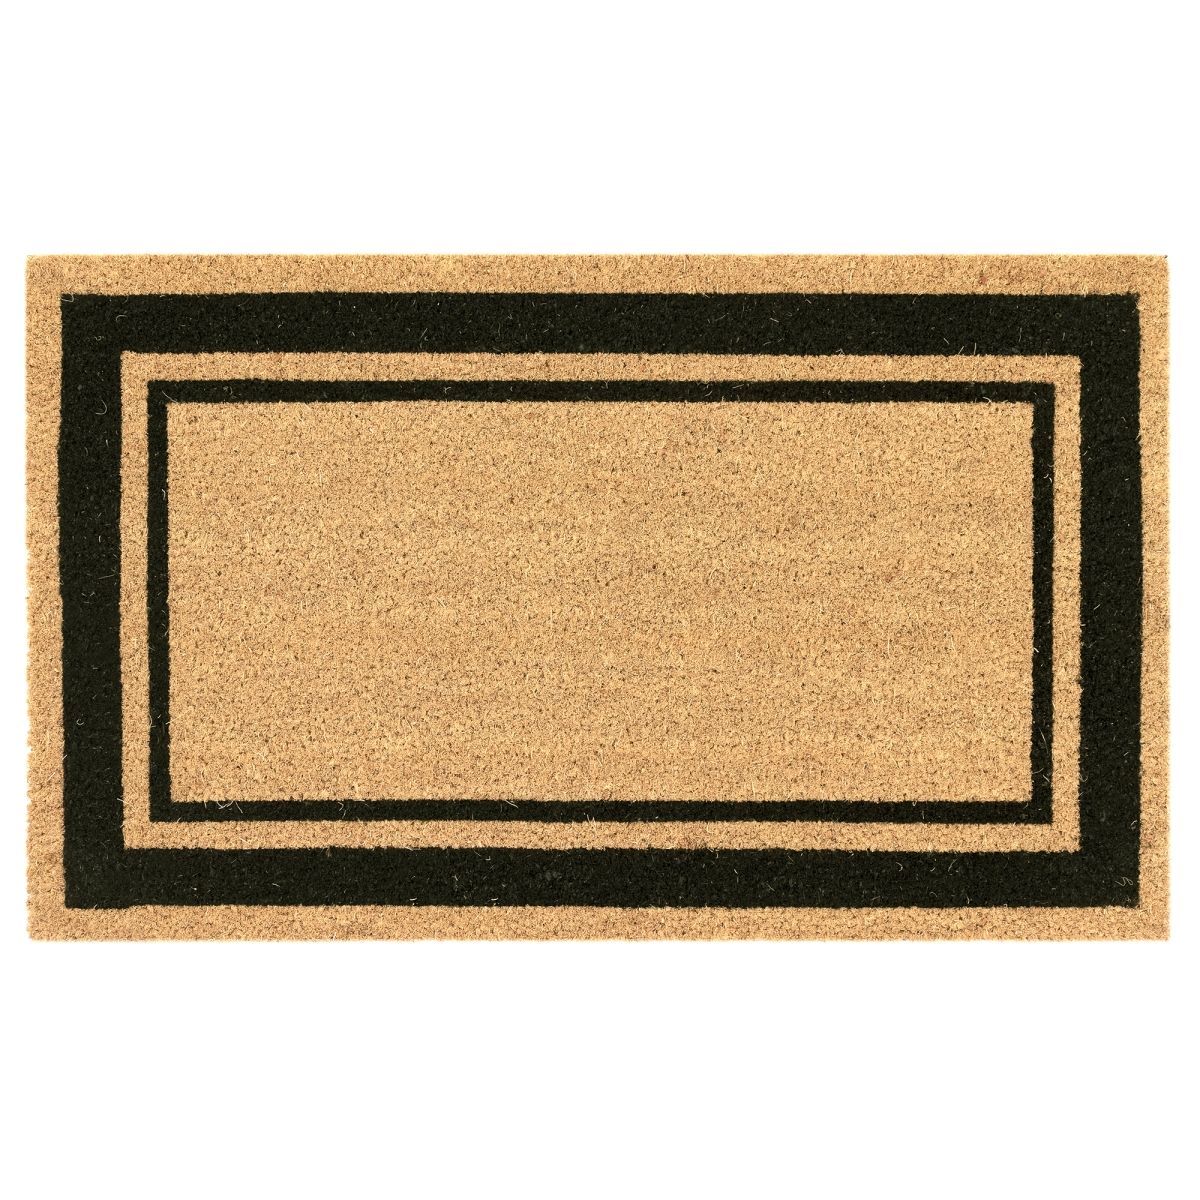 Ntr12223248 Liora Manne Natura Double Border Outdoor Mat, Black - 18 X 30 In.